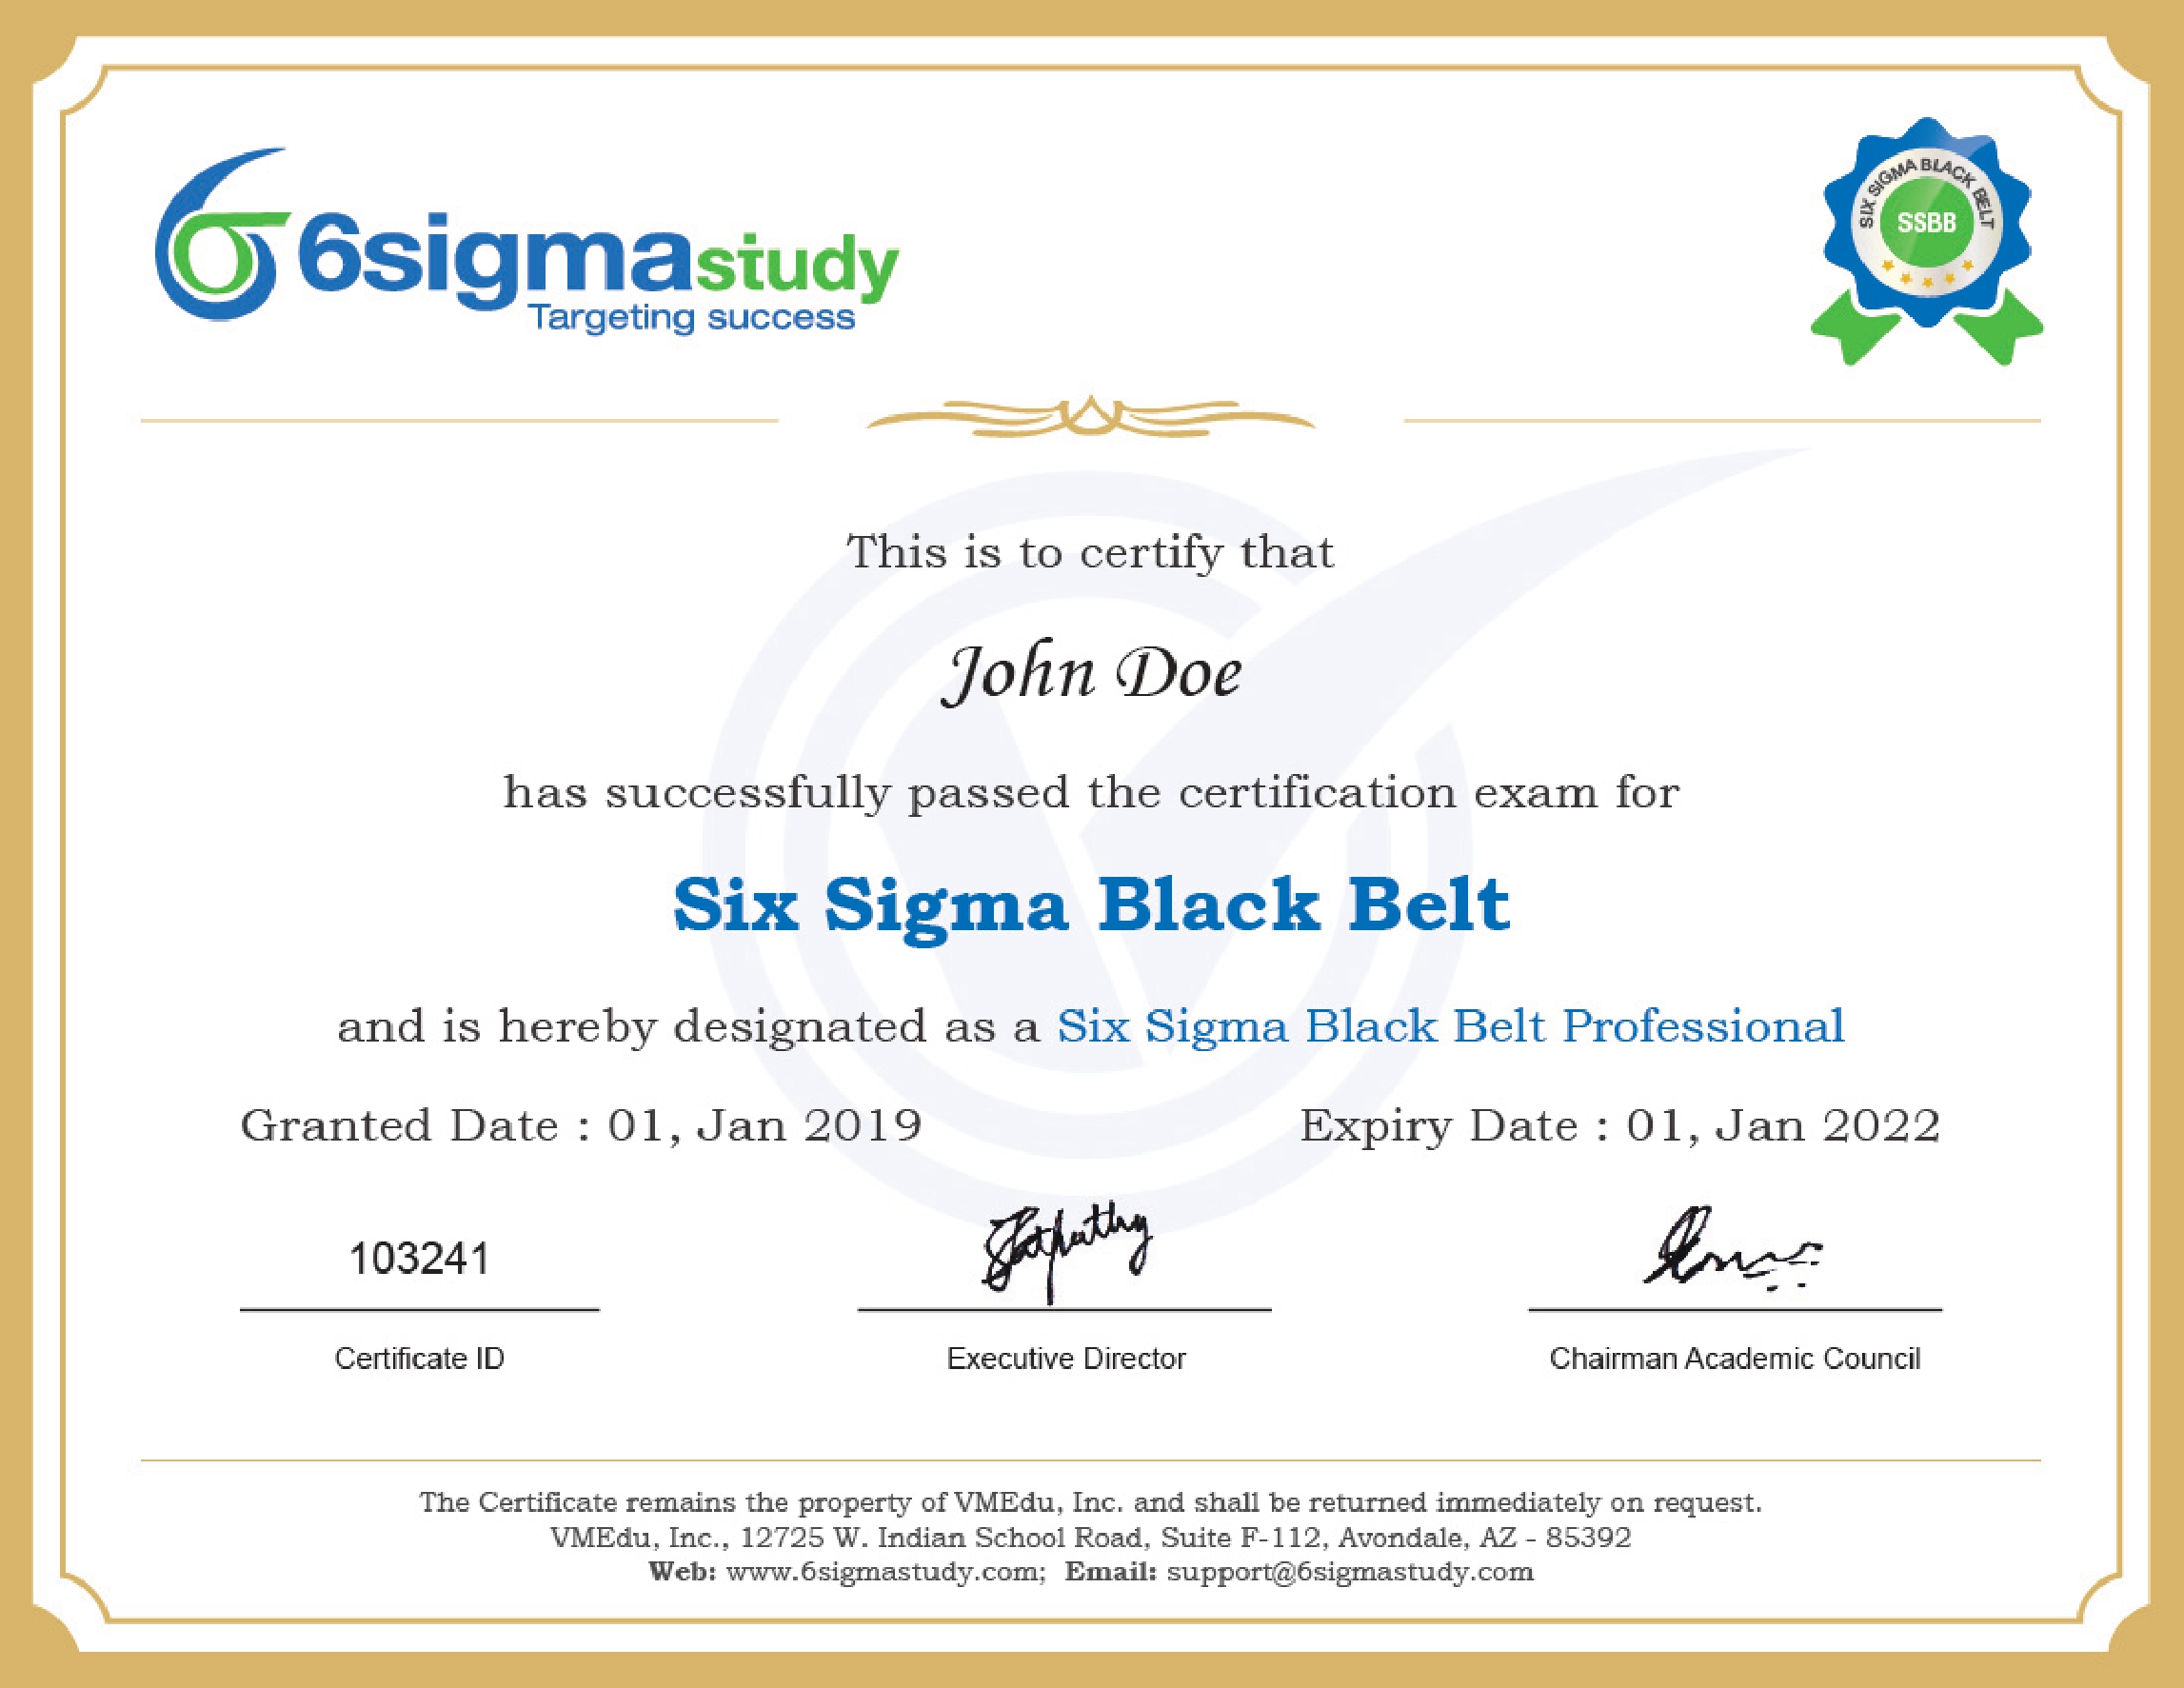 Best Of green belt six sigma questions Lean explained hierarchy hygger